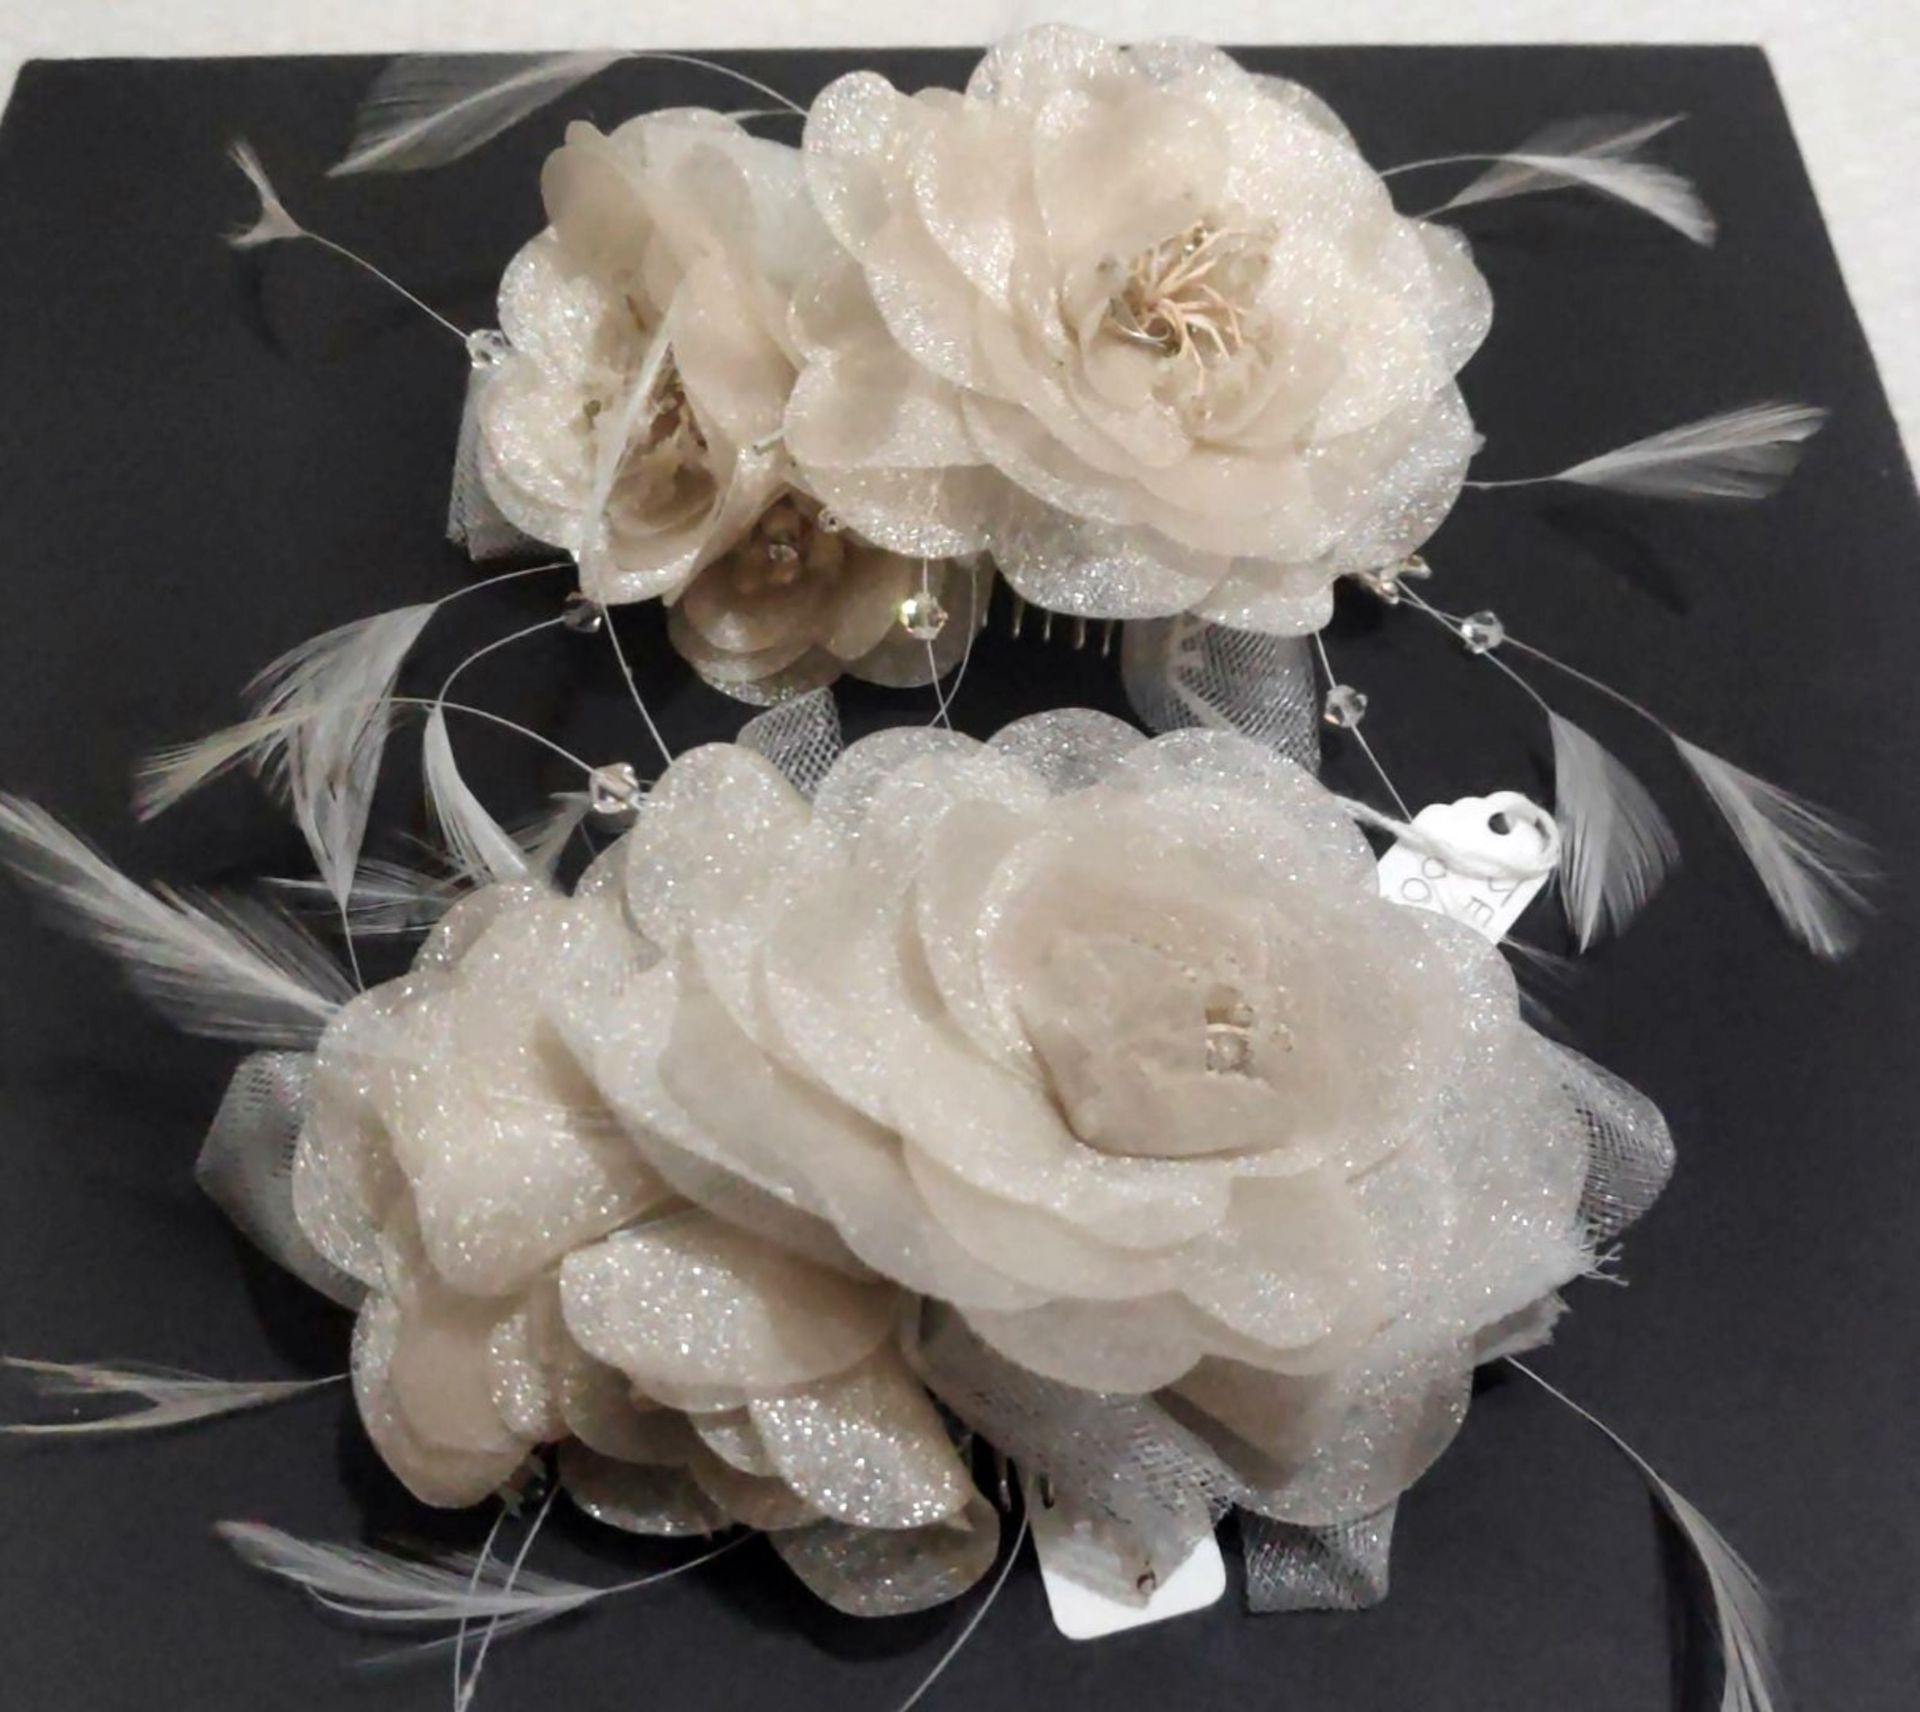 Lot of 5 x Silver Bridal Hair Fascinator Accessories by Richard Designs - HON176 - CL733 - Image 3 of 7